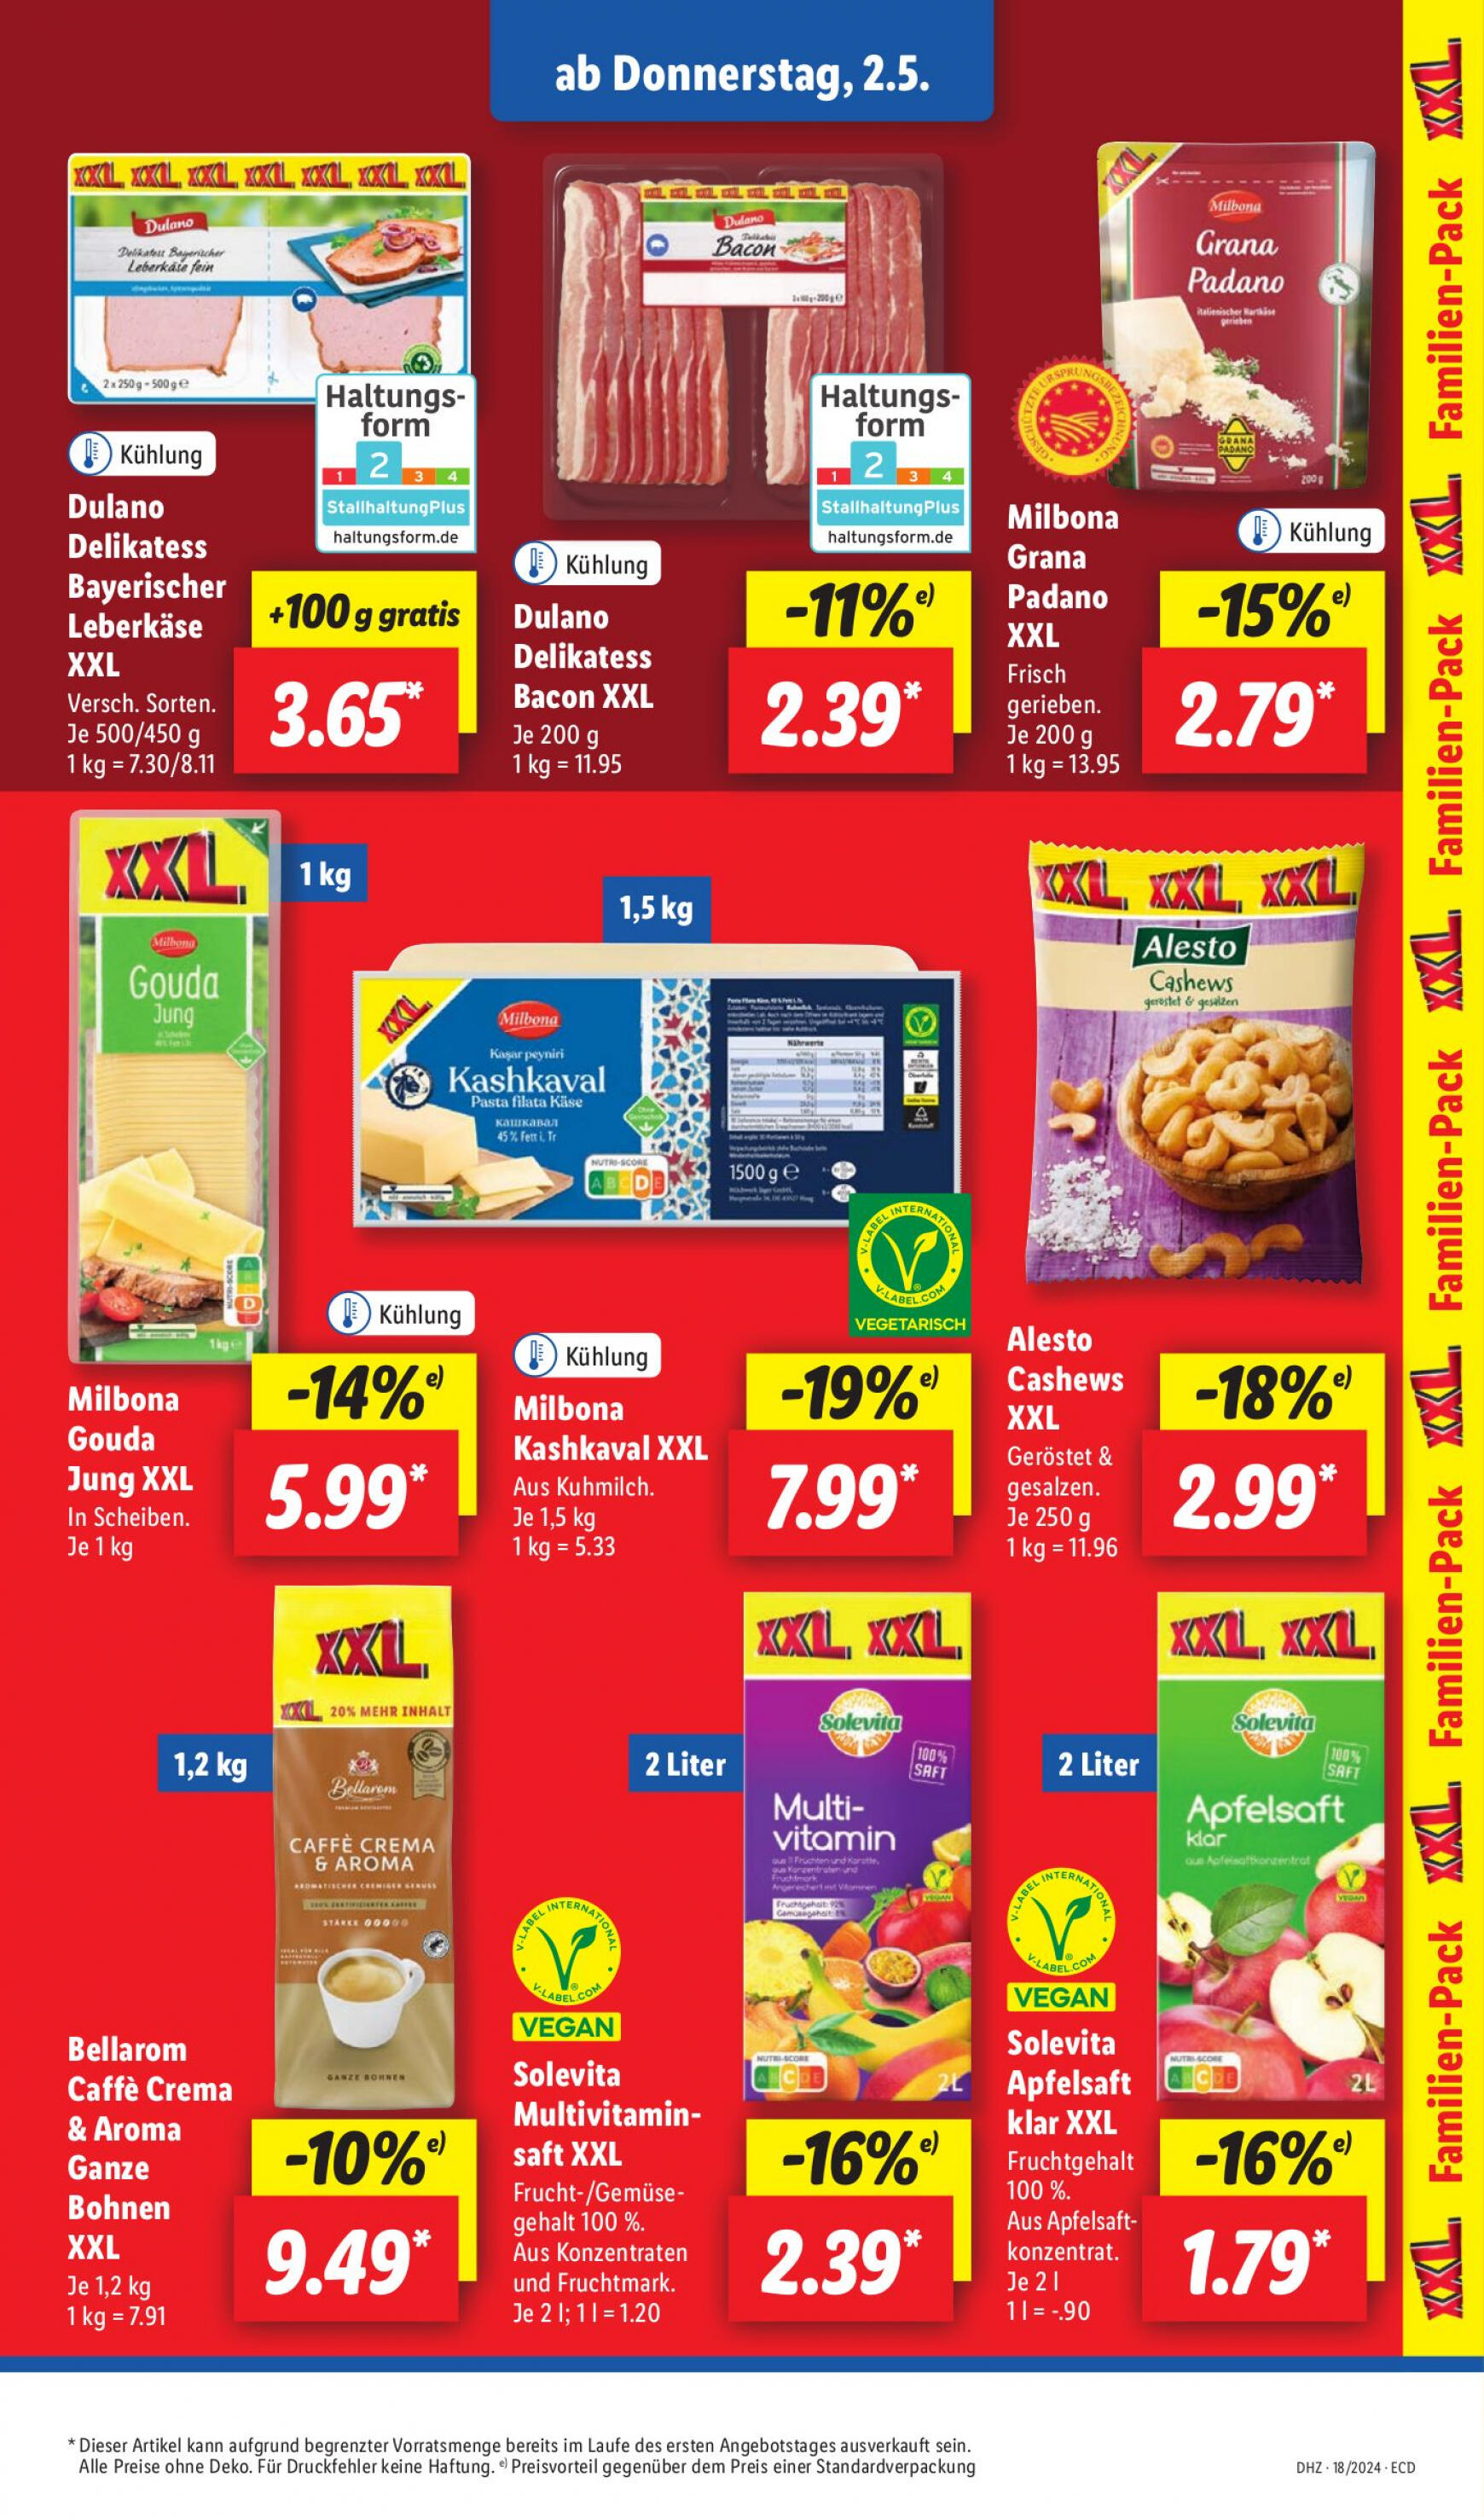 lidl - Flyer Lidl aktuell 29.04. - 04.05. - page: 49